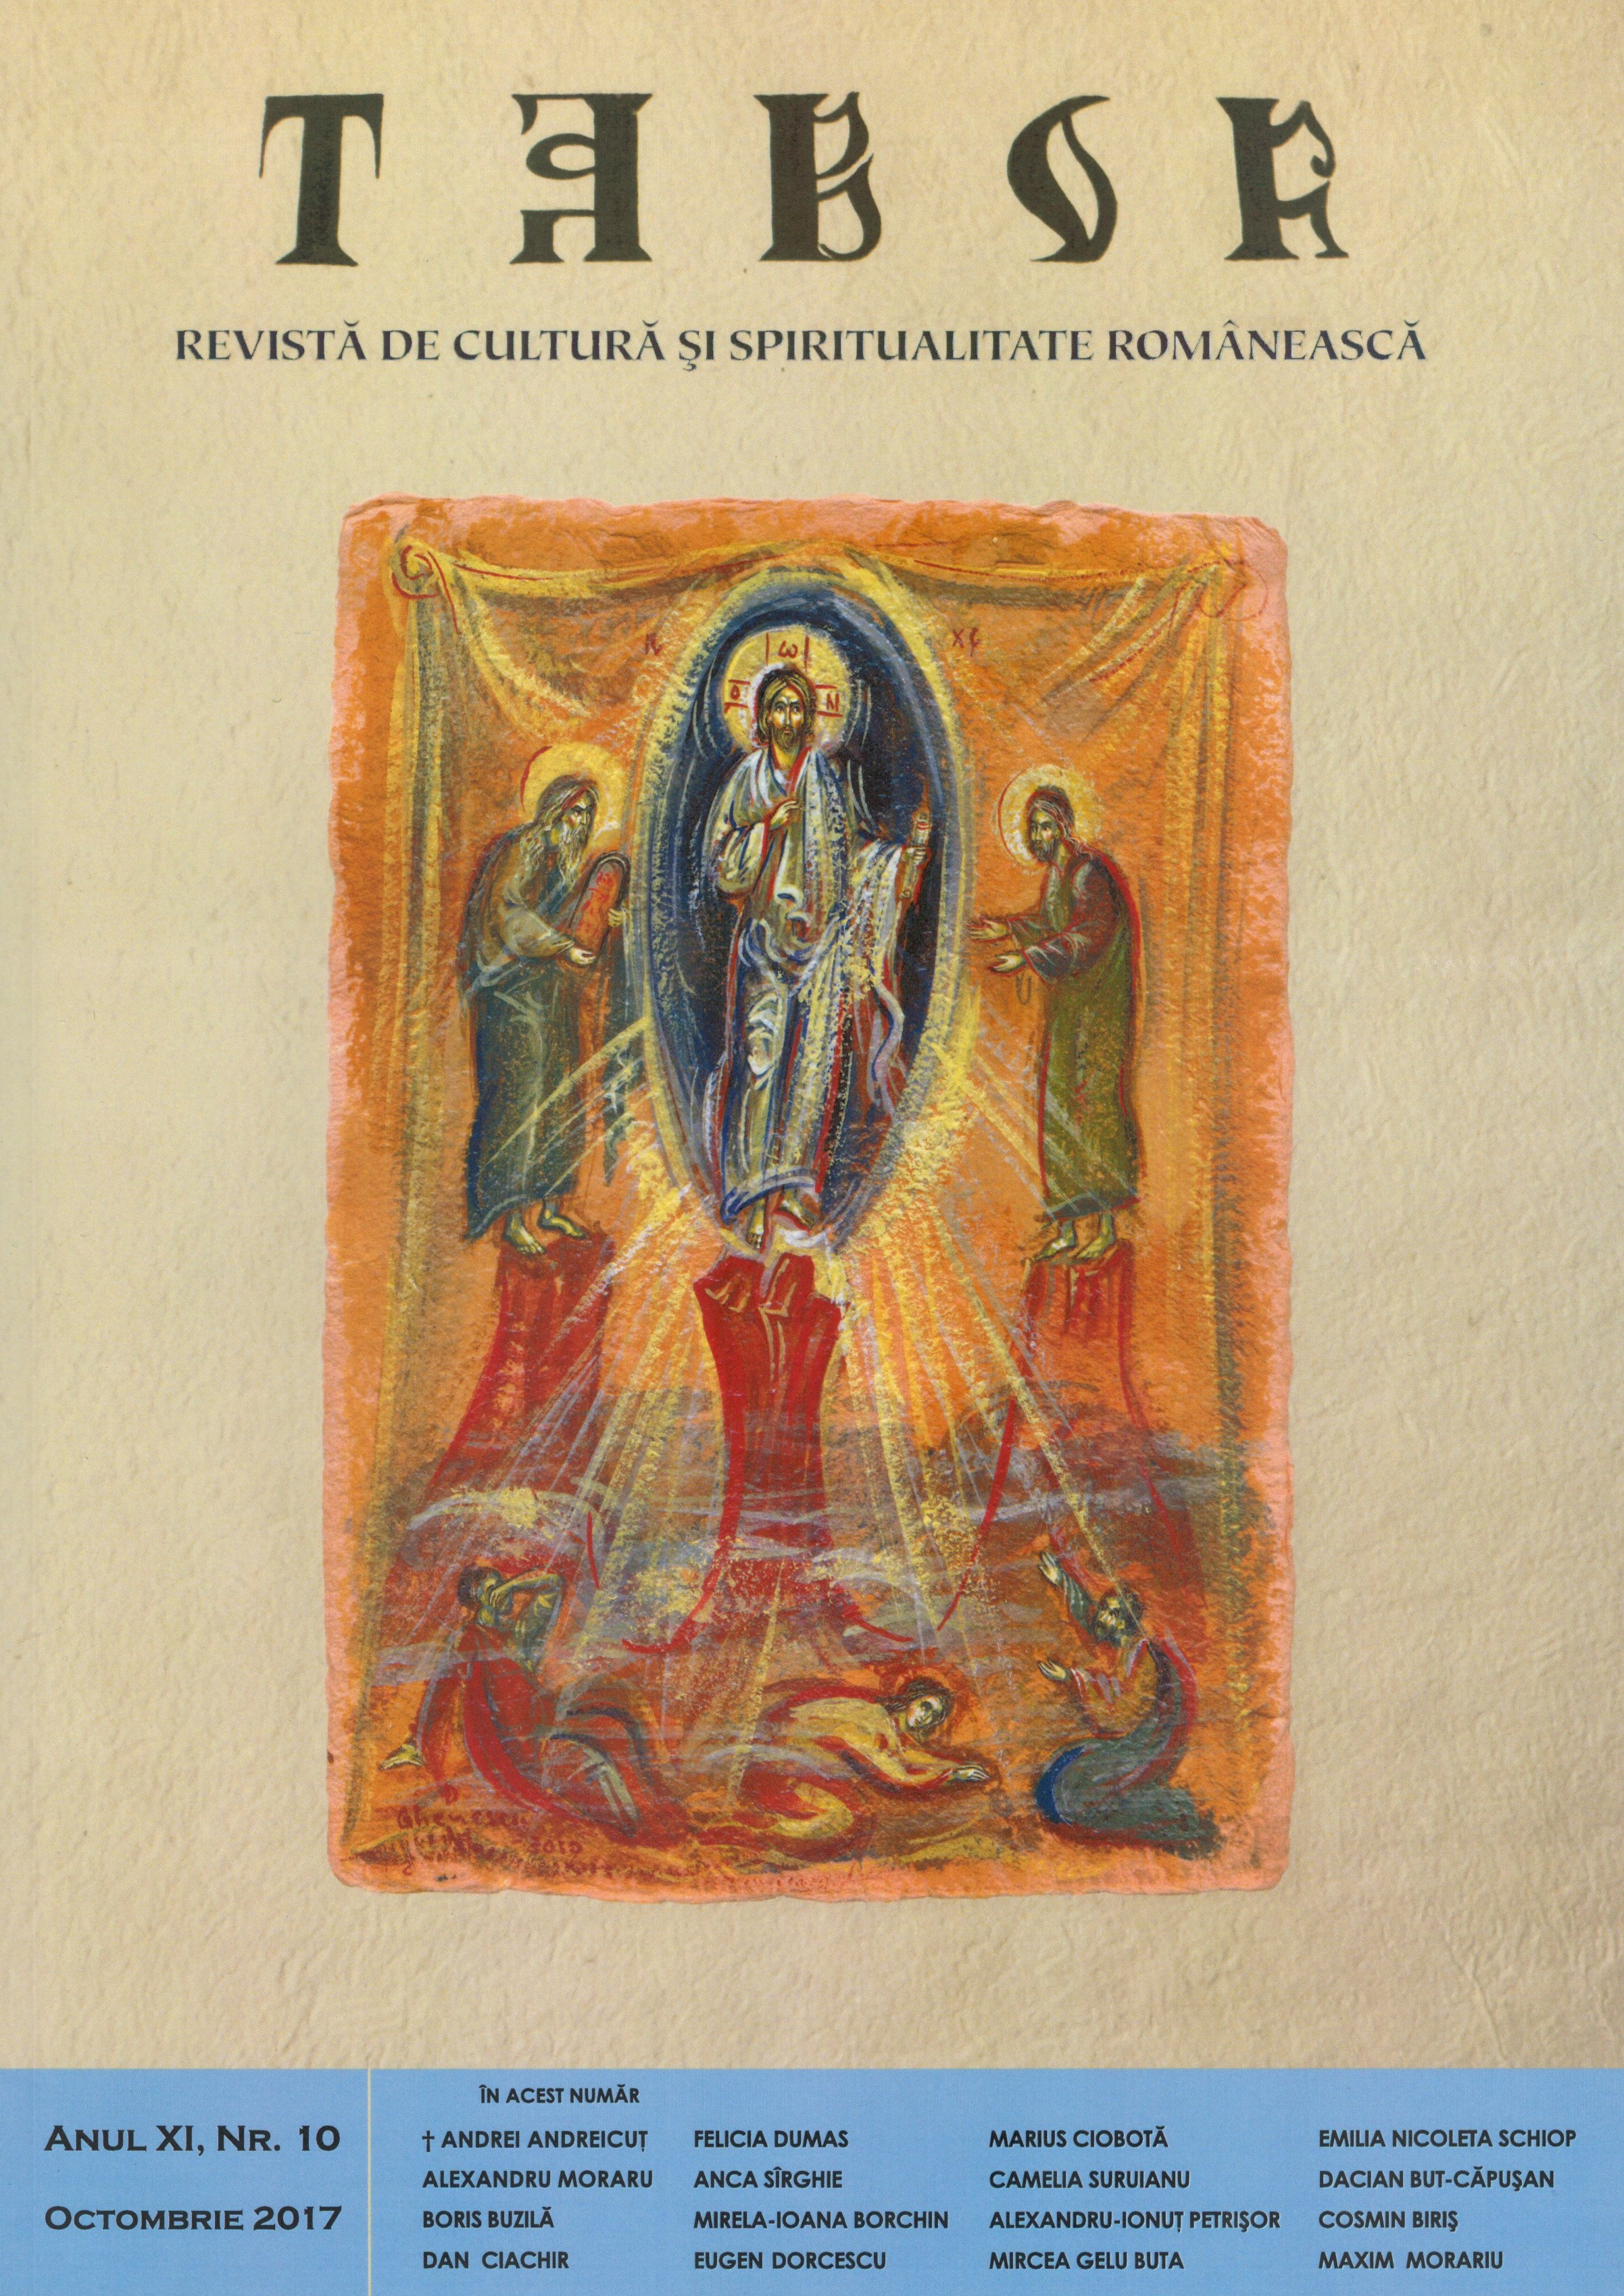 The Acatist of St. Demetrius Basarabov the New - a litany dedicated by Sandu Tudor to the protector of the capital Cover Image